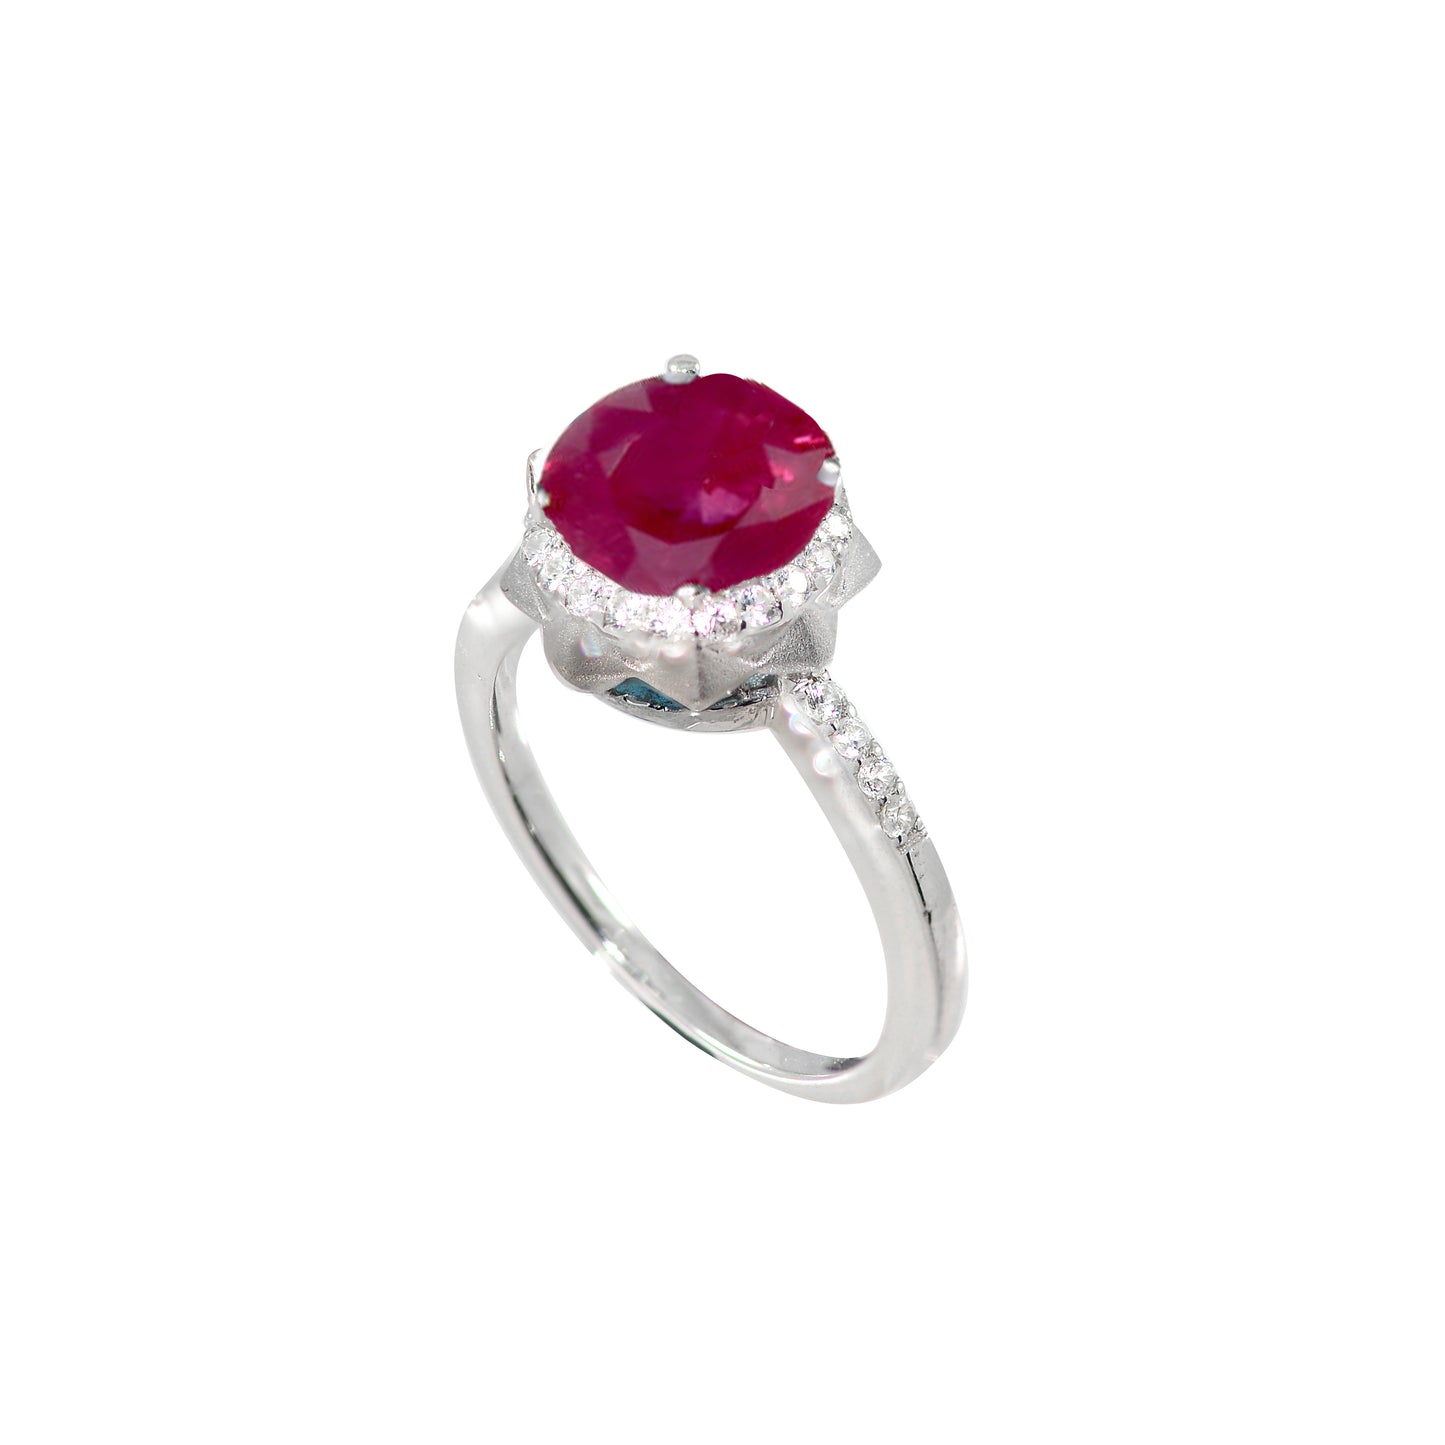 Live in Colors - Ruby Rings